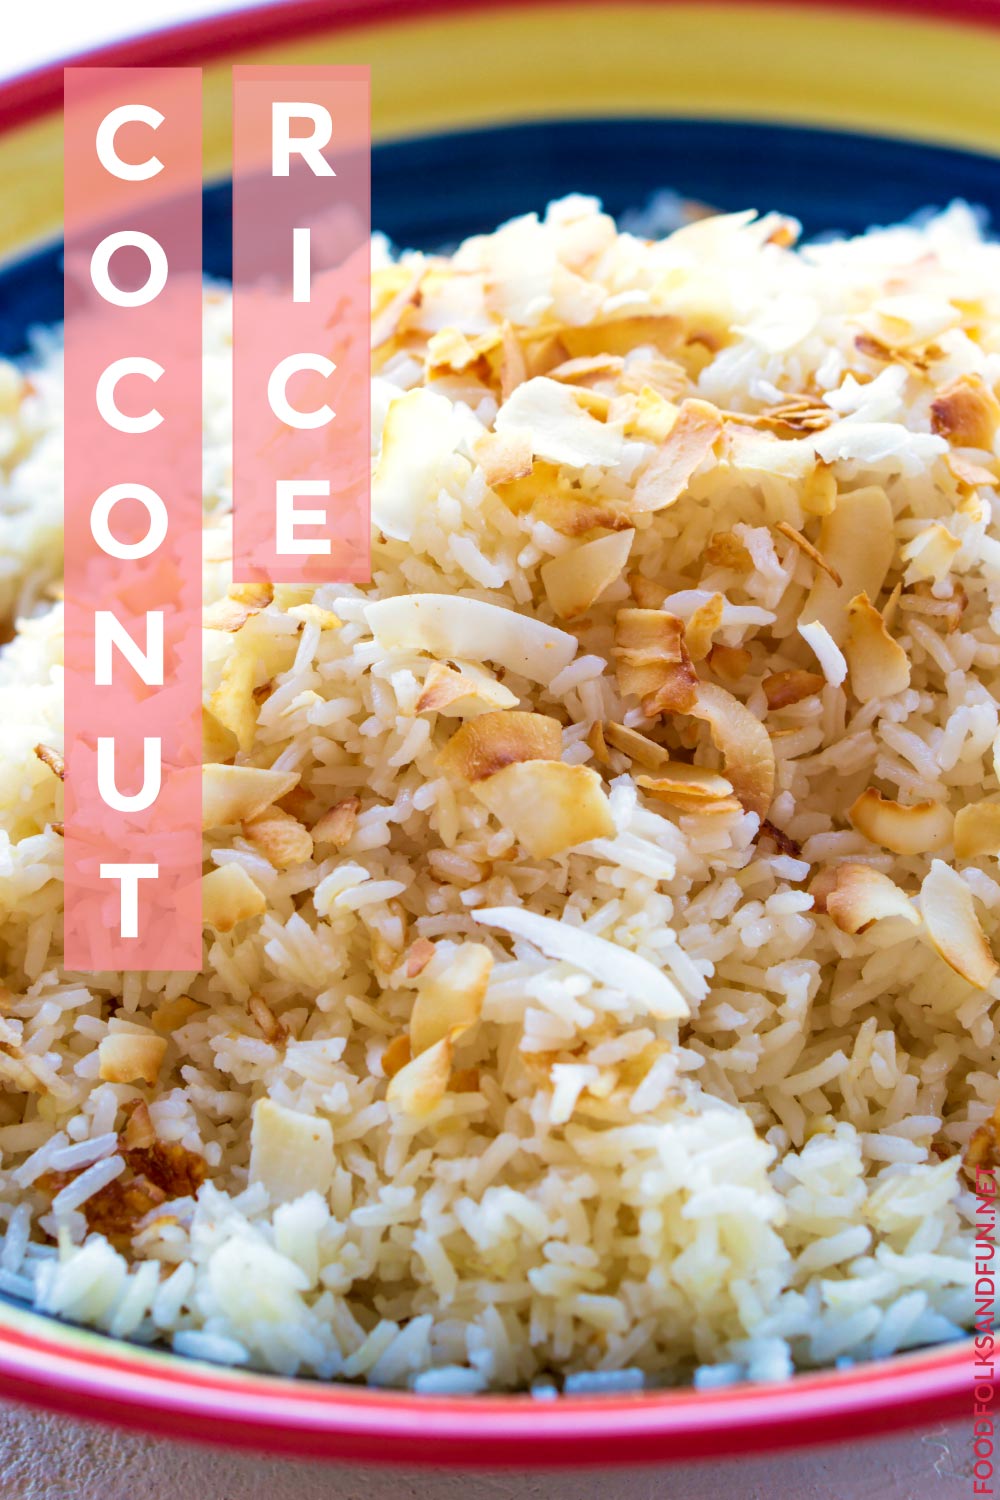 Delicious Coconut Milk recipe for an easy side dish.